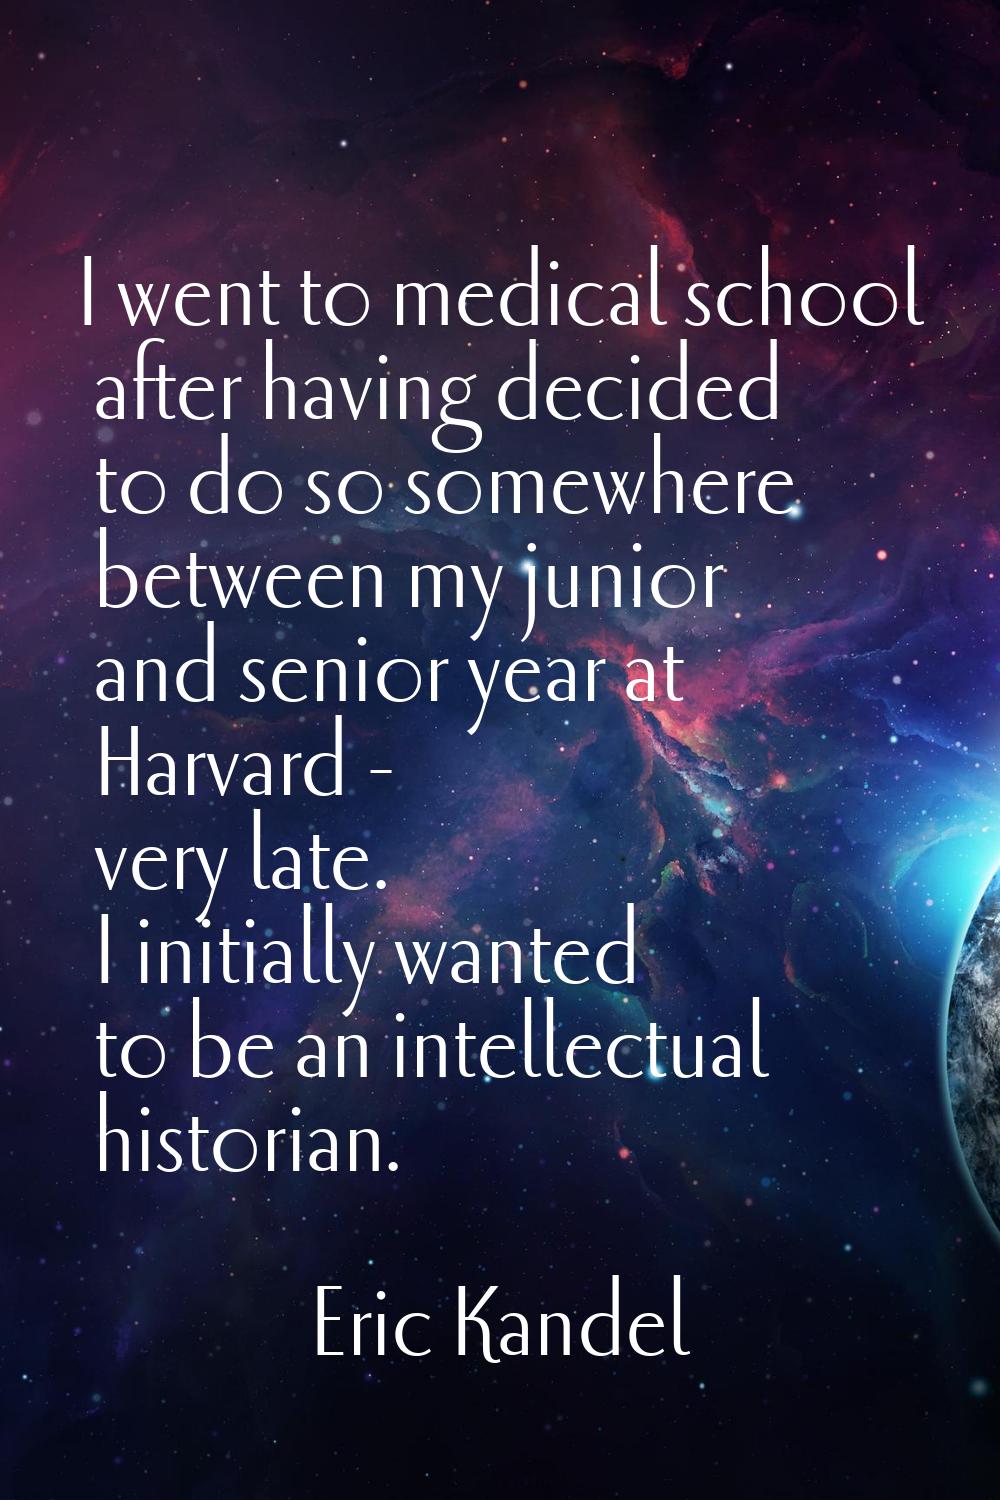 I went to medical school after having decided to do so somewhere between my junior and senior year 